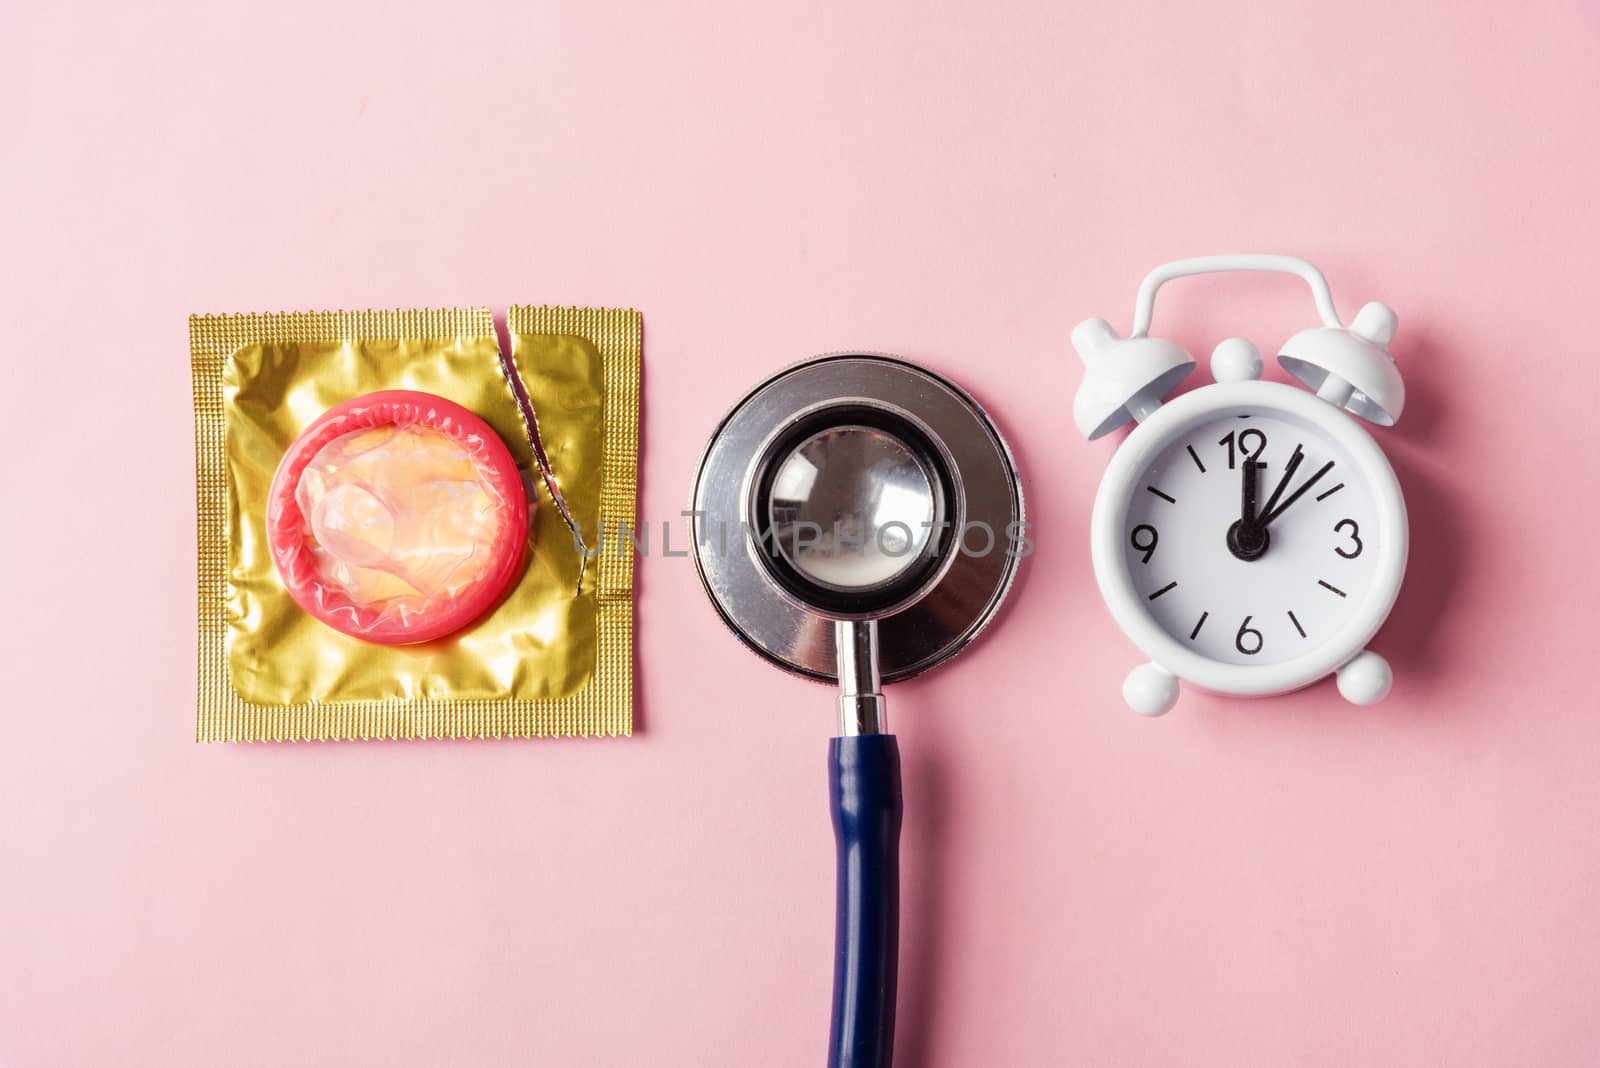 condom in a pack, stethoscope and alarm clock by Sorapop